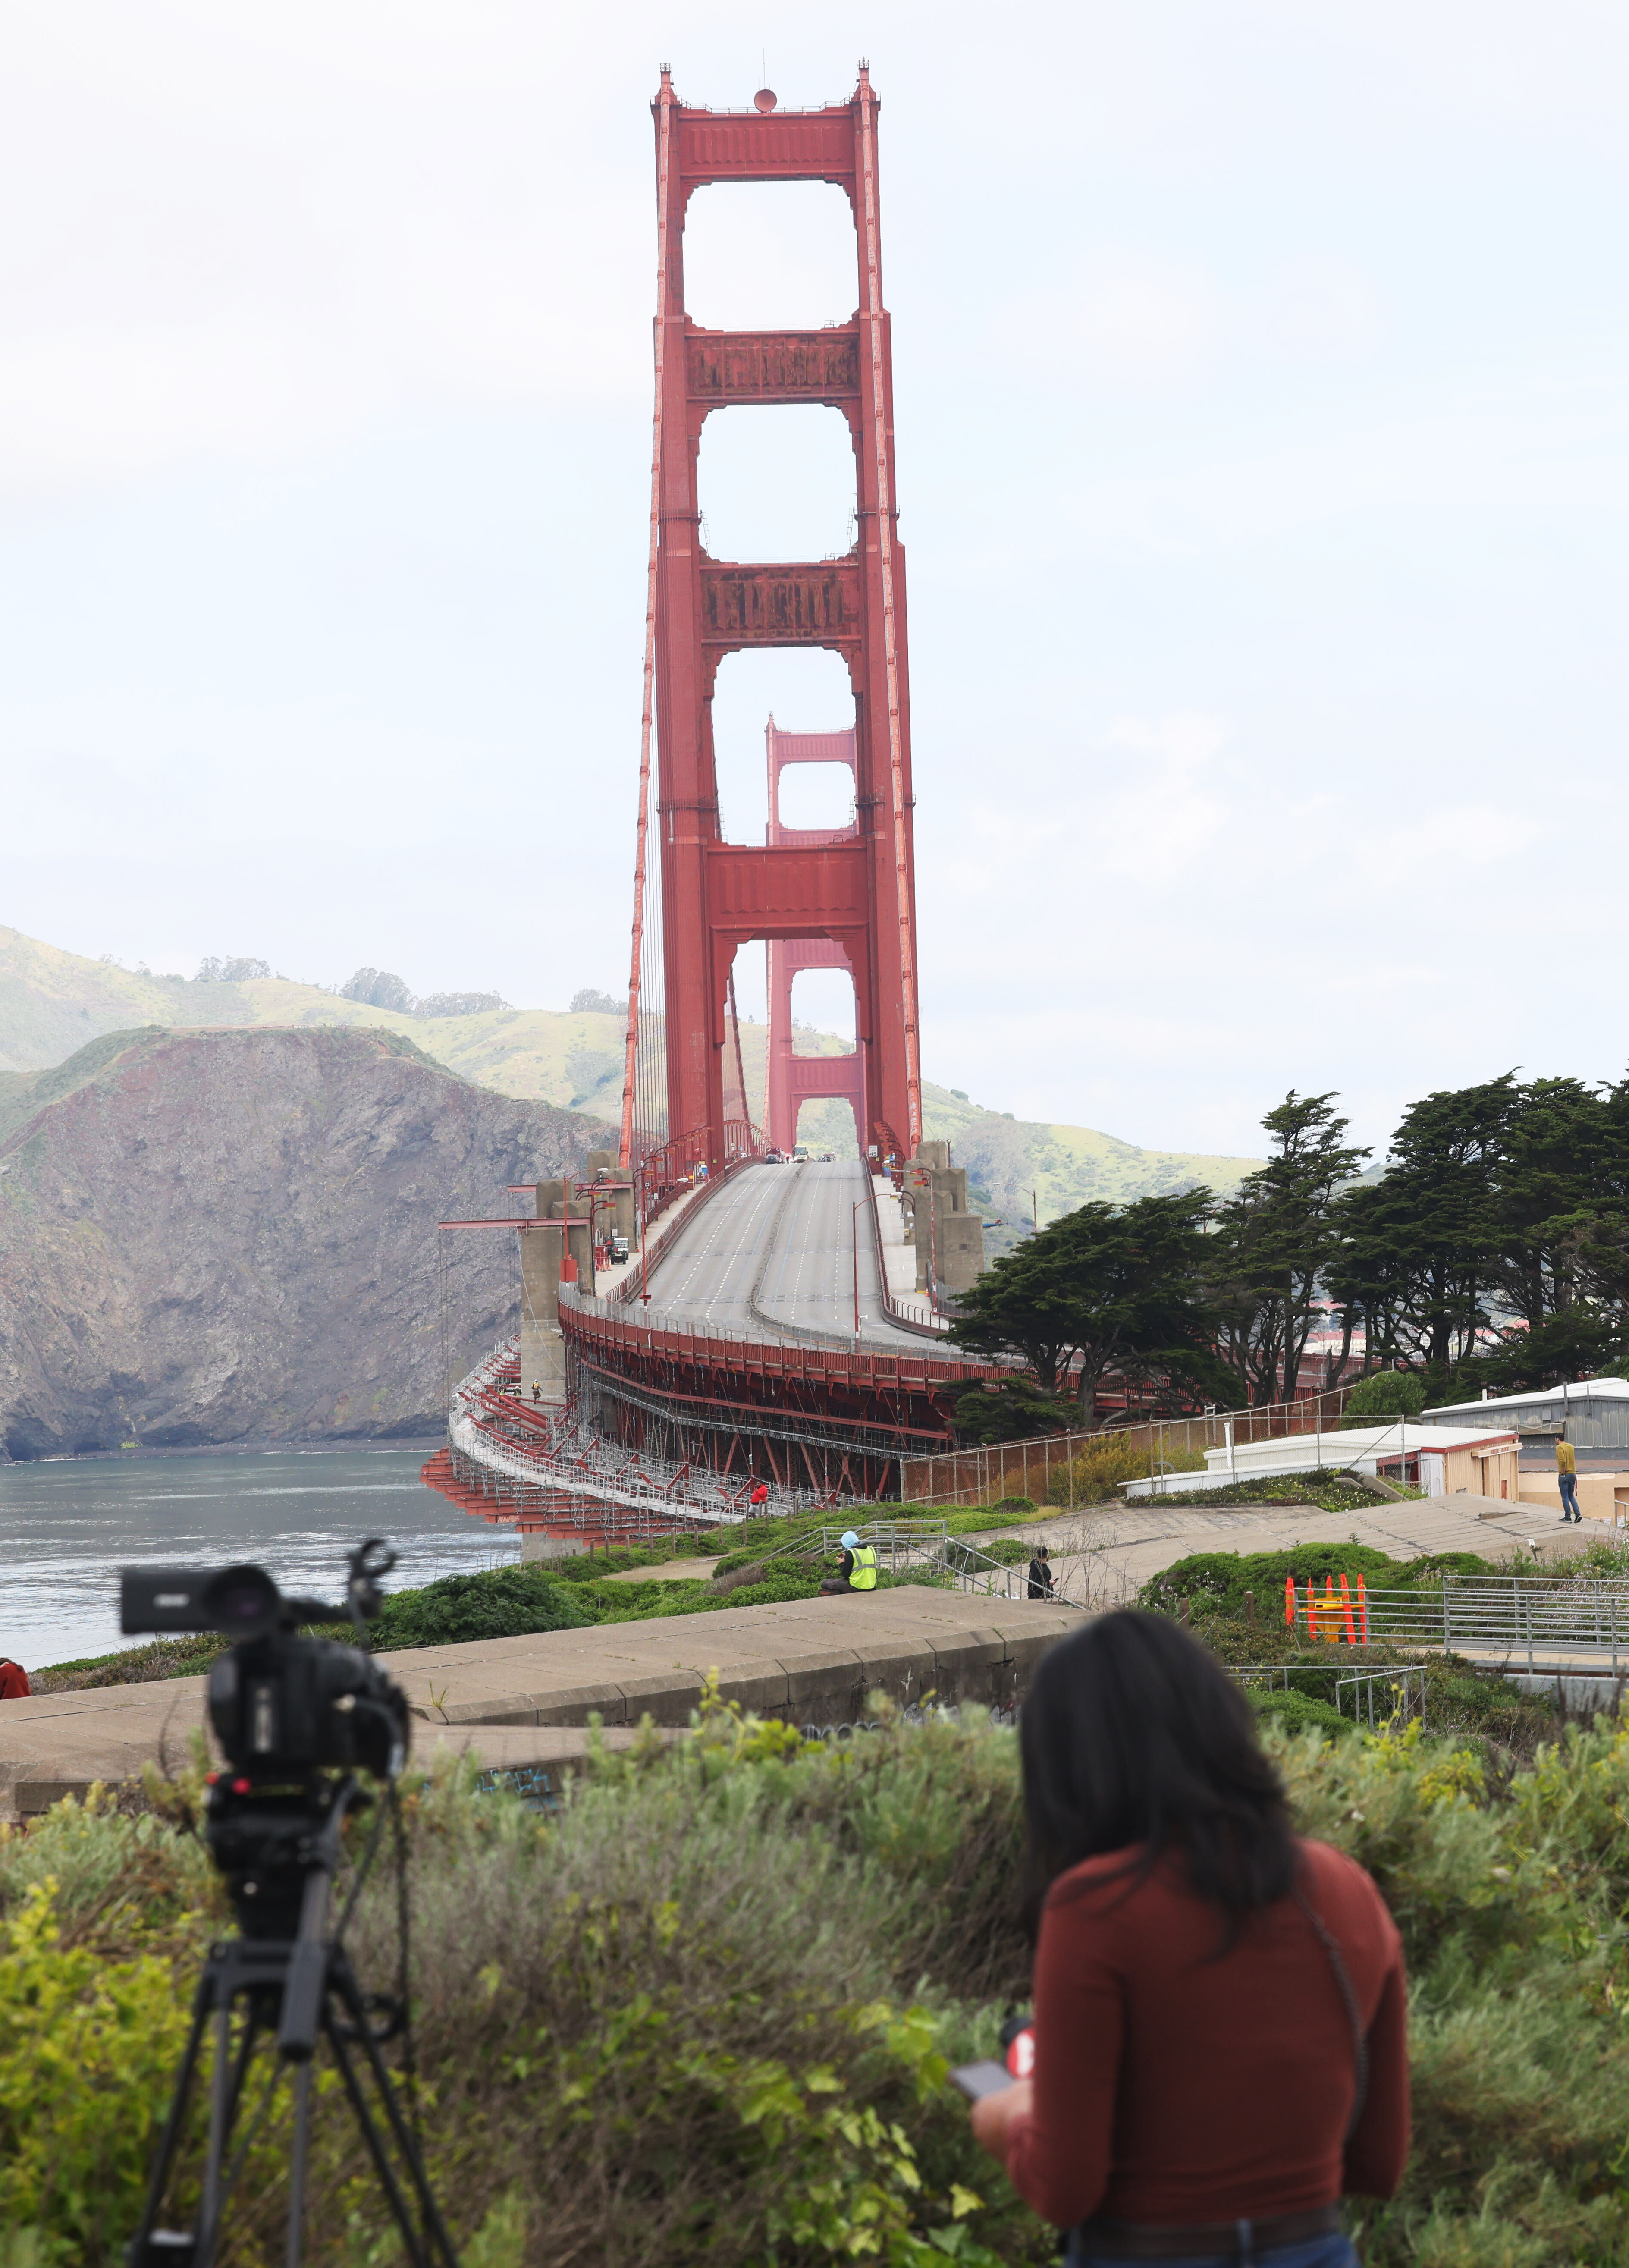 A person is capturing footage of the Golden Gate Bridge; lush greenery and hills surround the iconic red structure.